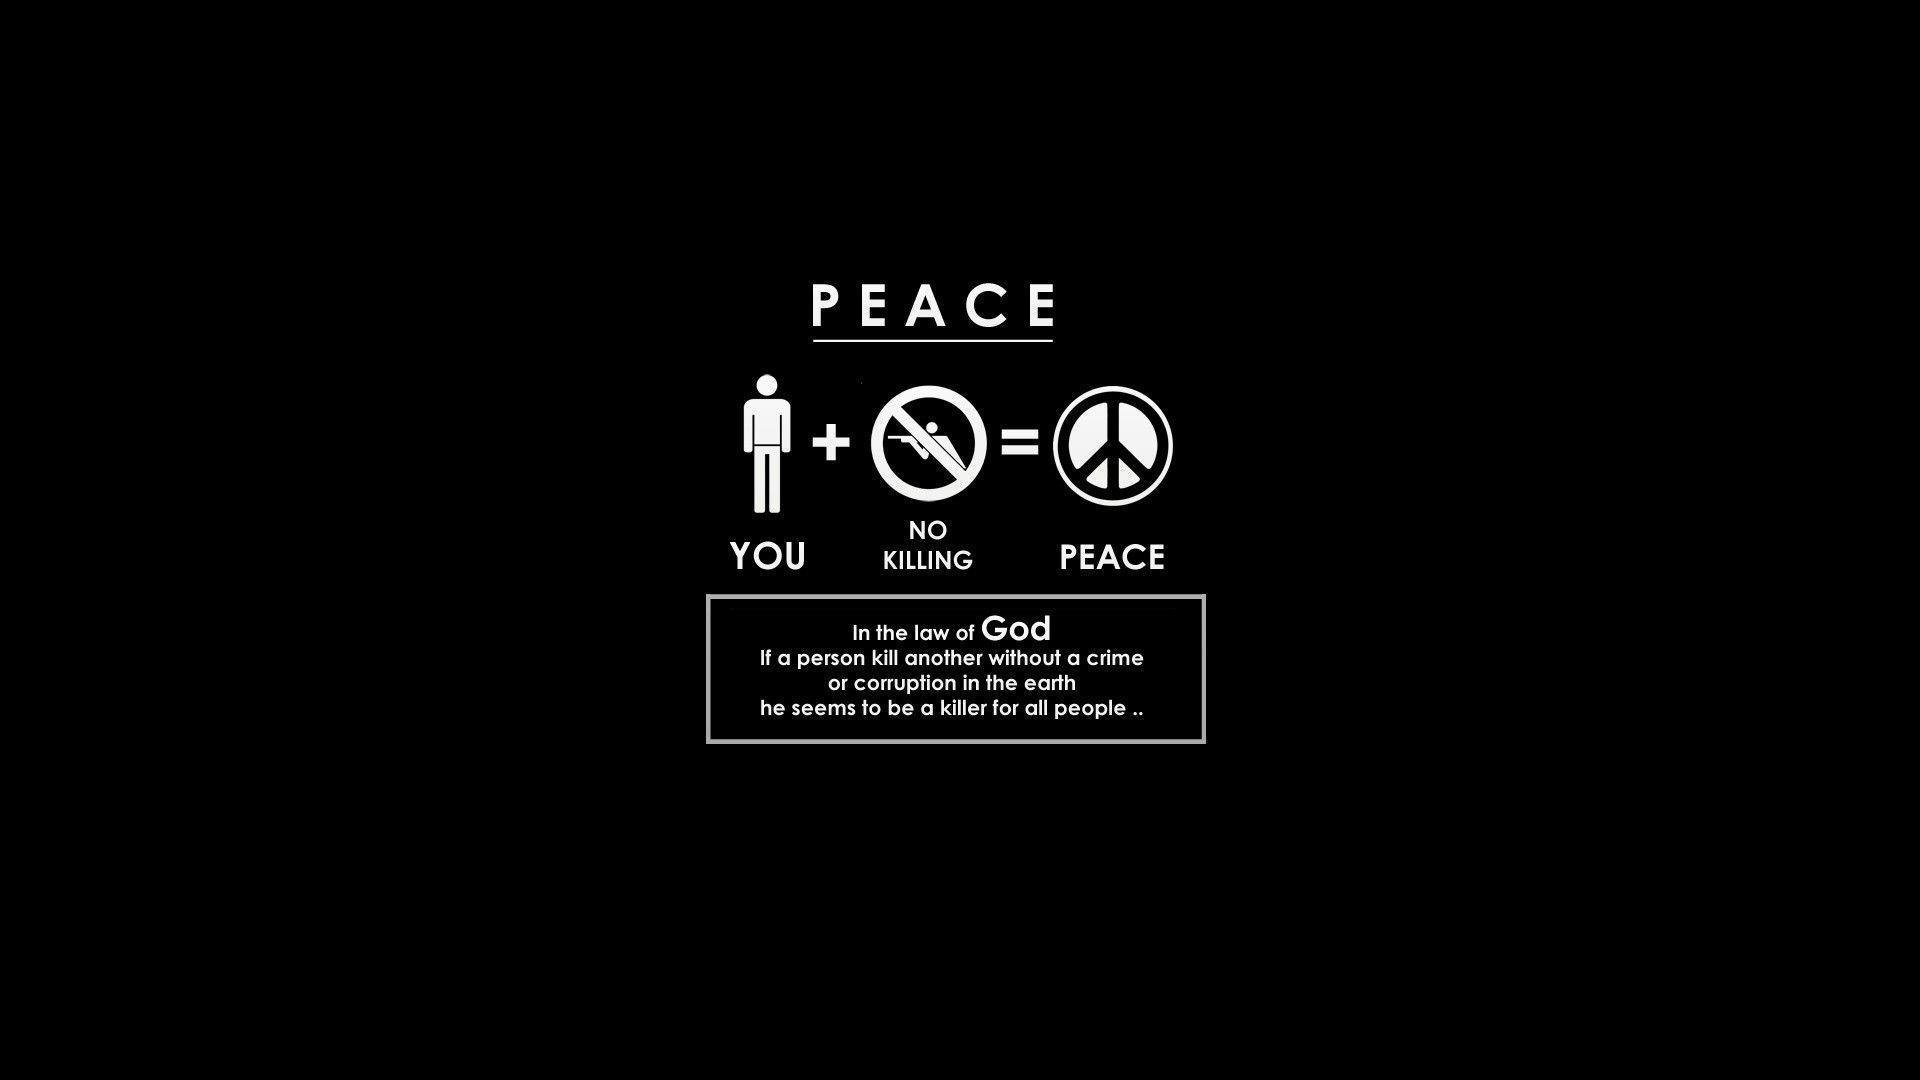 Image For > Peace Wallpapers Hd